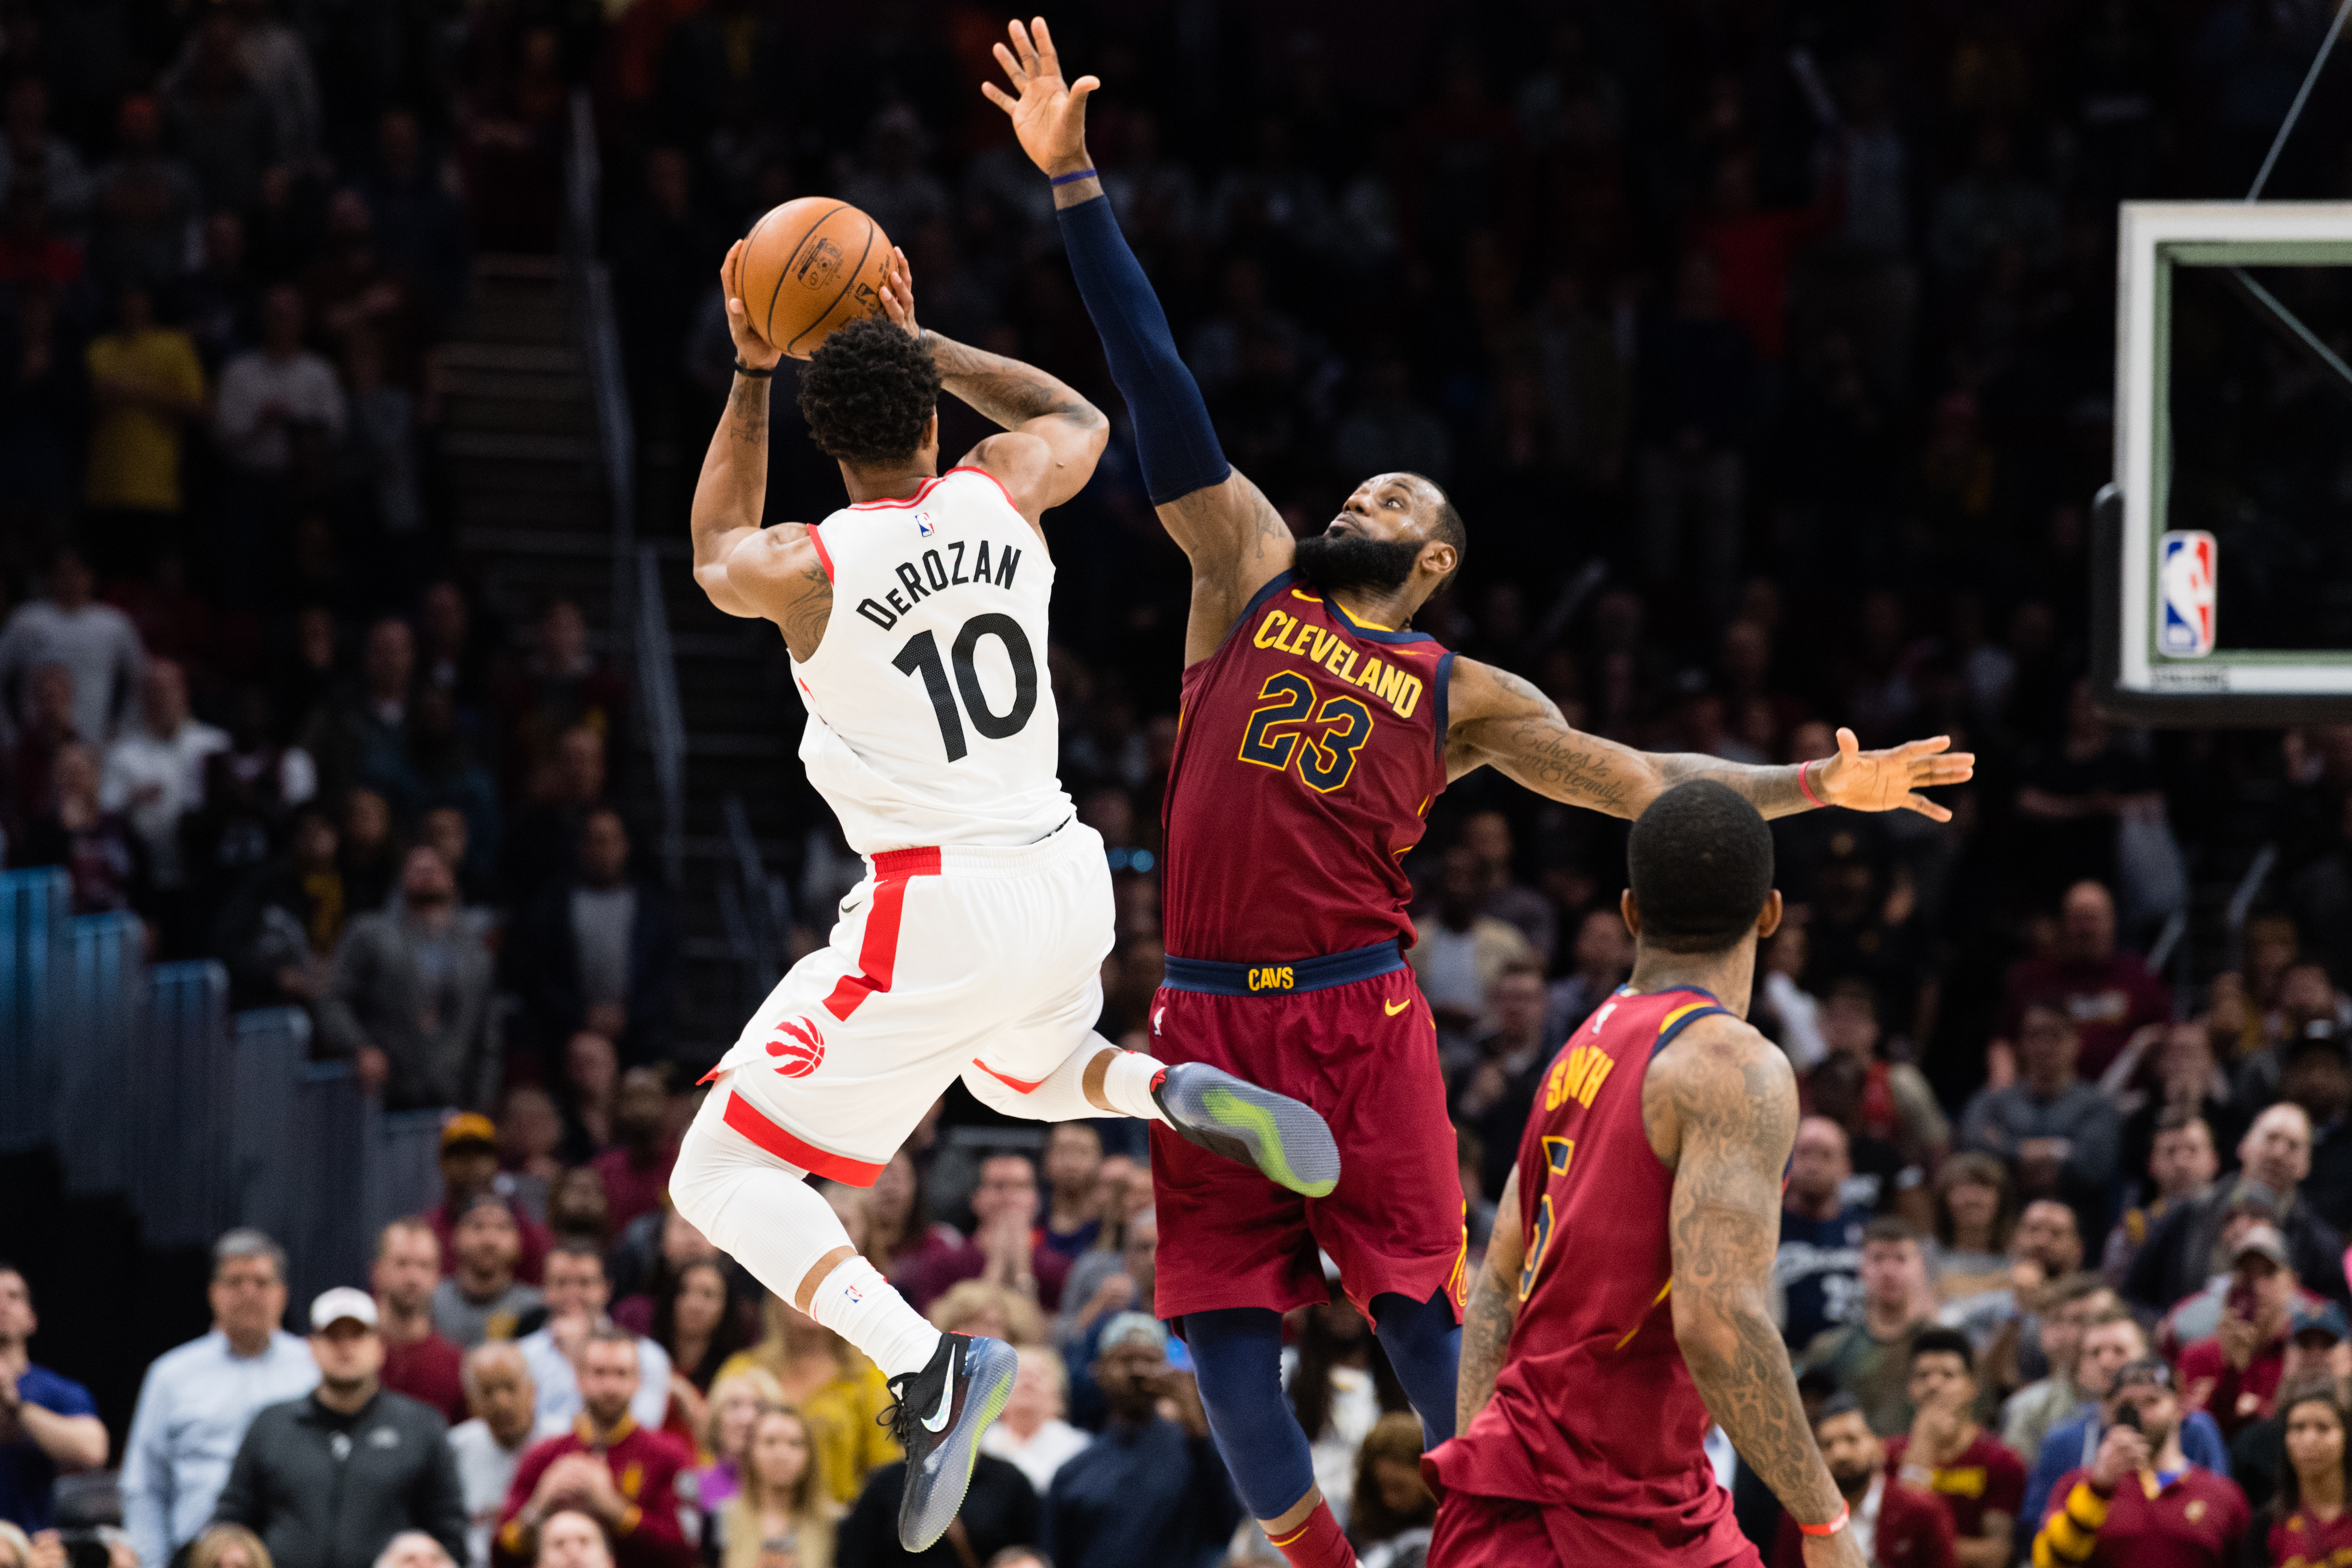 LeBron James defends DeMar DeRozan during a game in 2018